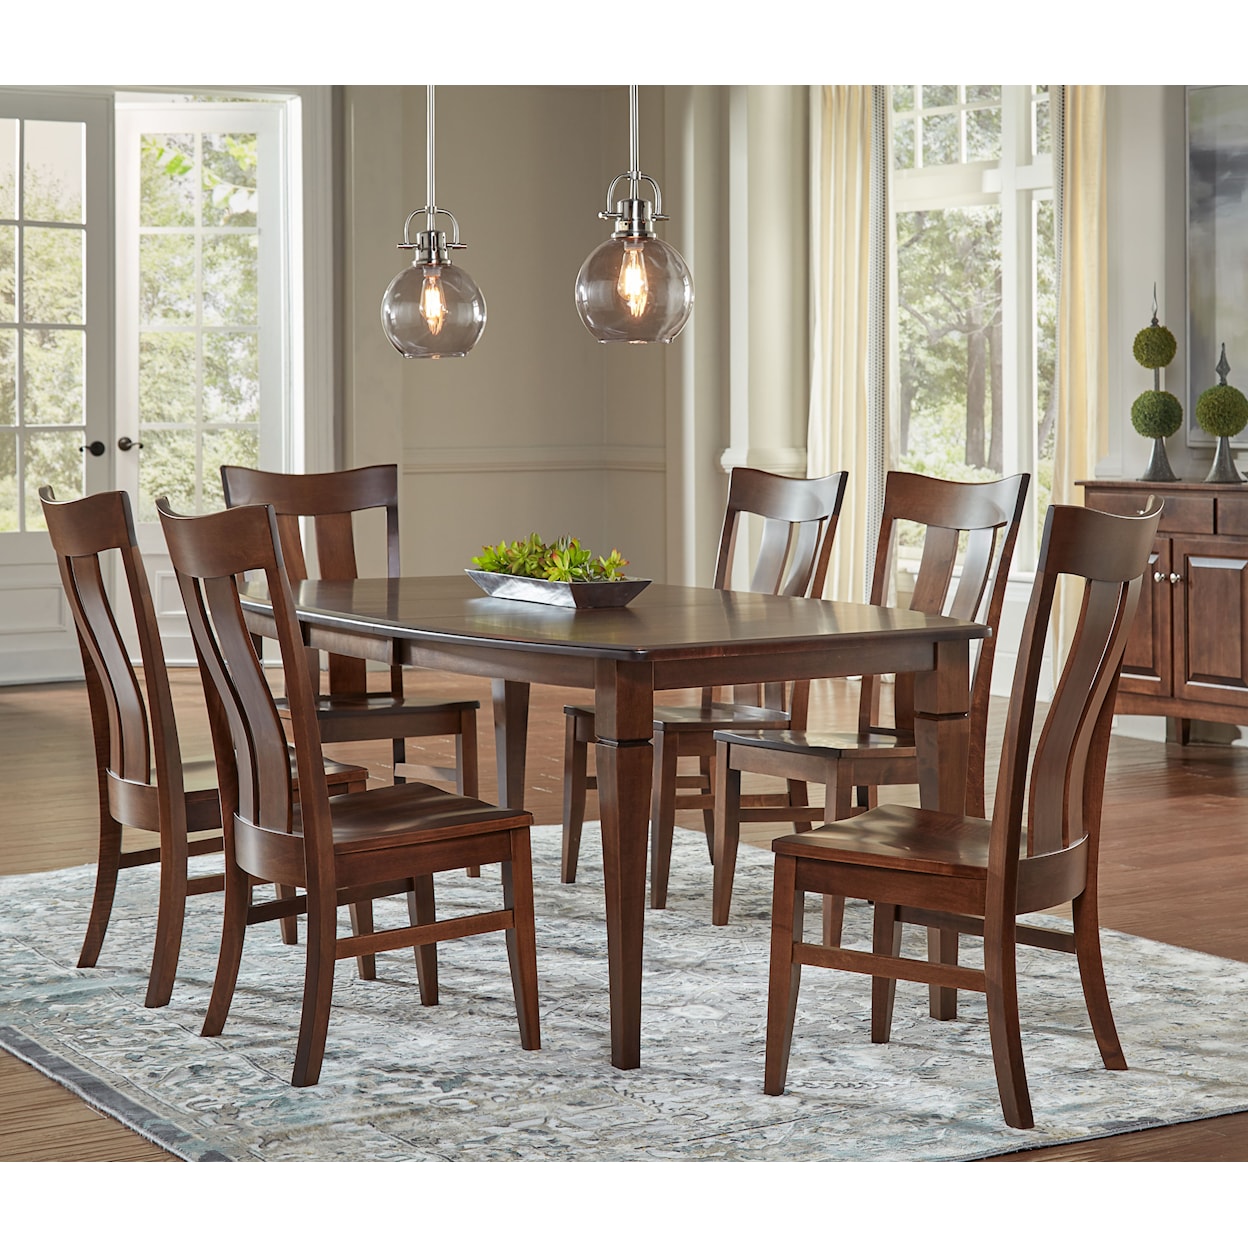 Archbold Furniture Amish Essentials Casual Dining 7pc Boat Shaped Dining Set